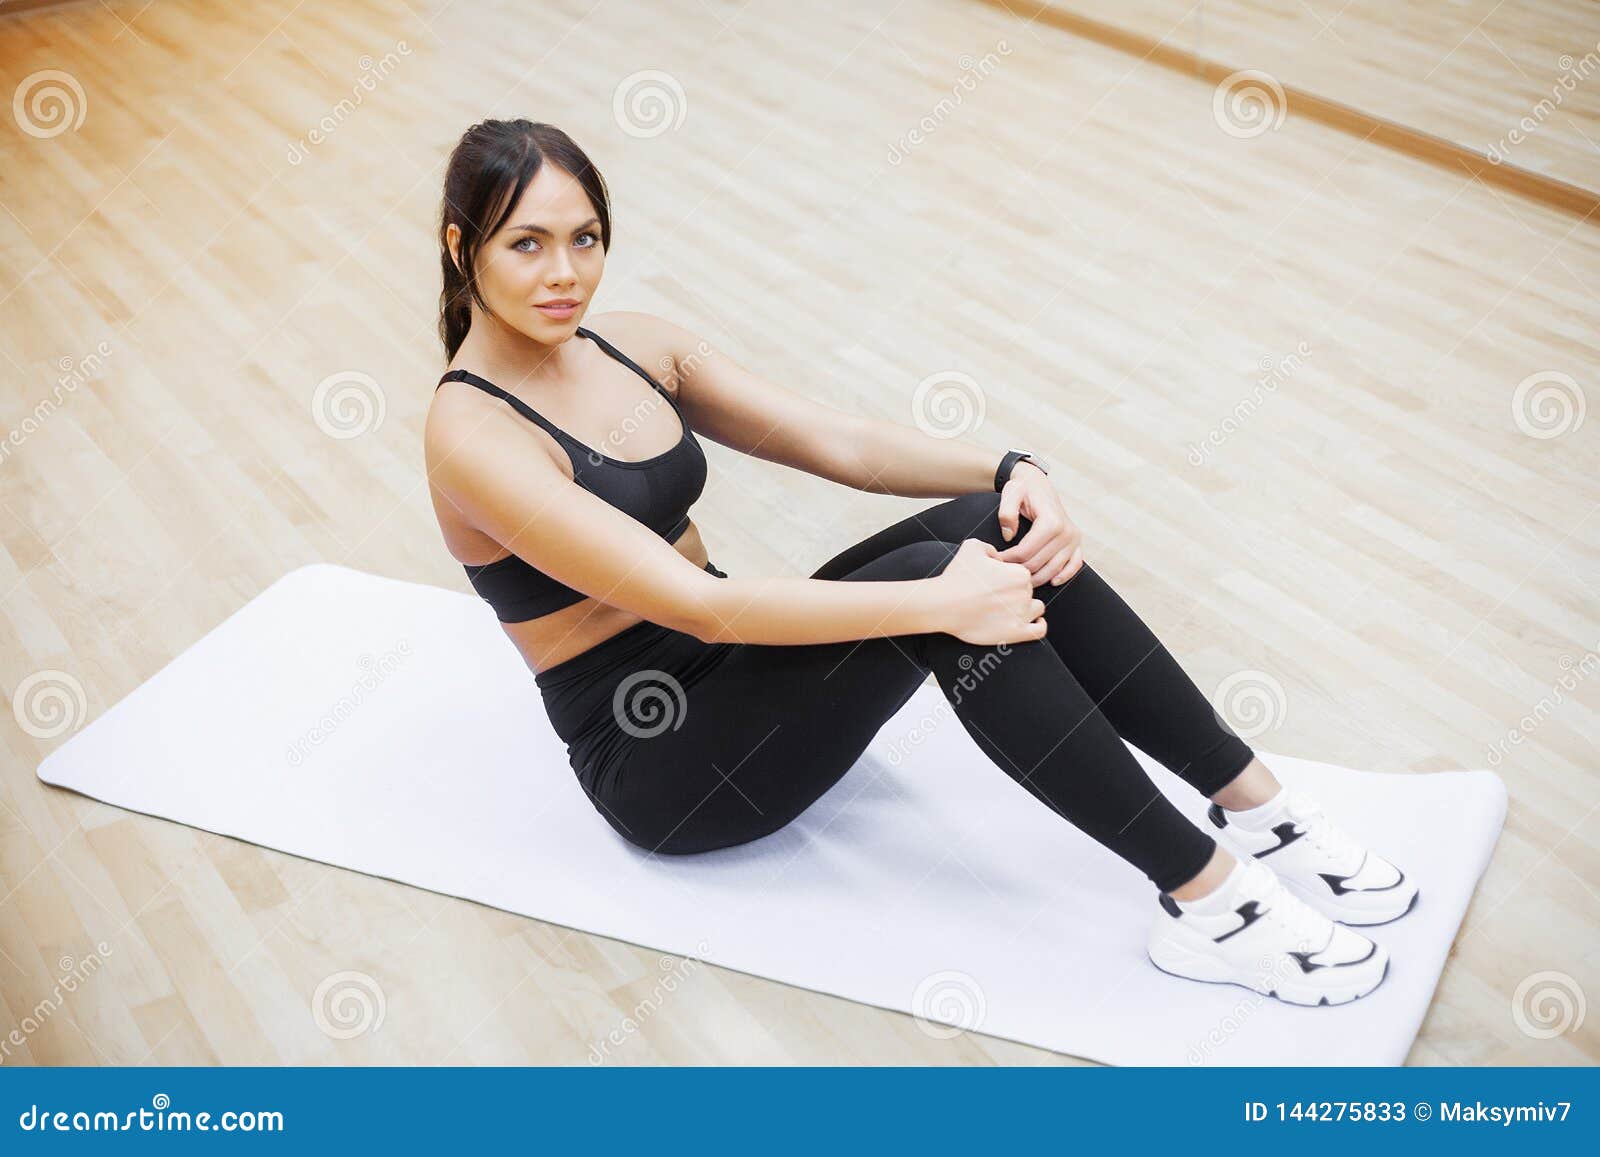 Fitness Girl. Athletic Girl Working Out in Gym Stock Image - Image of ...